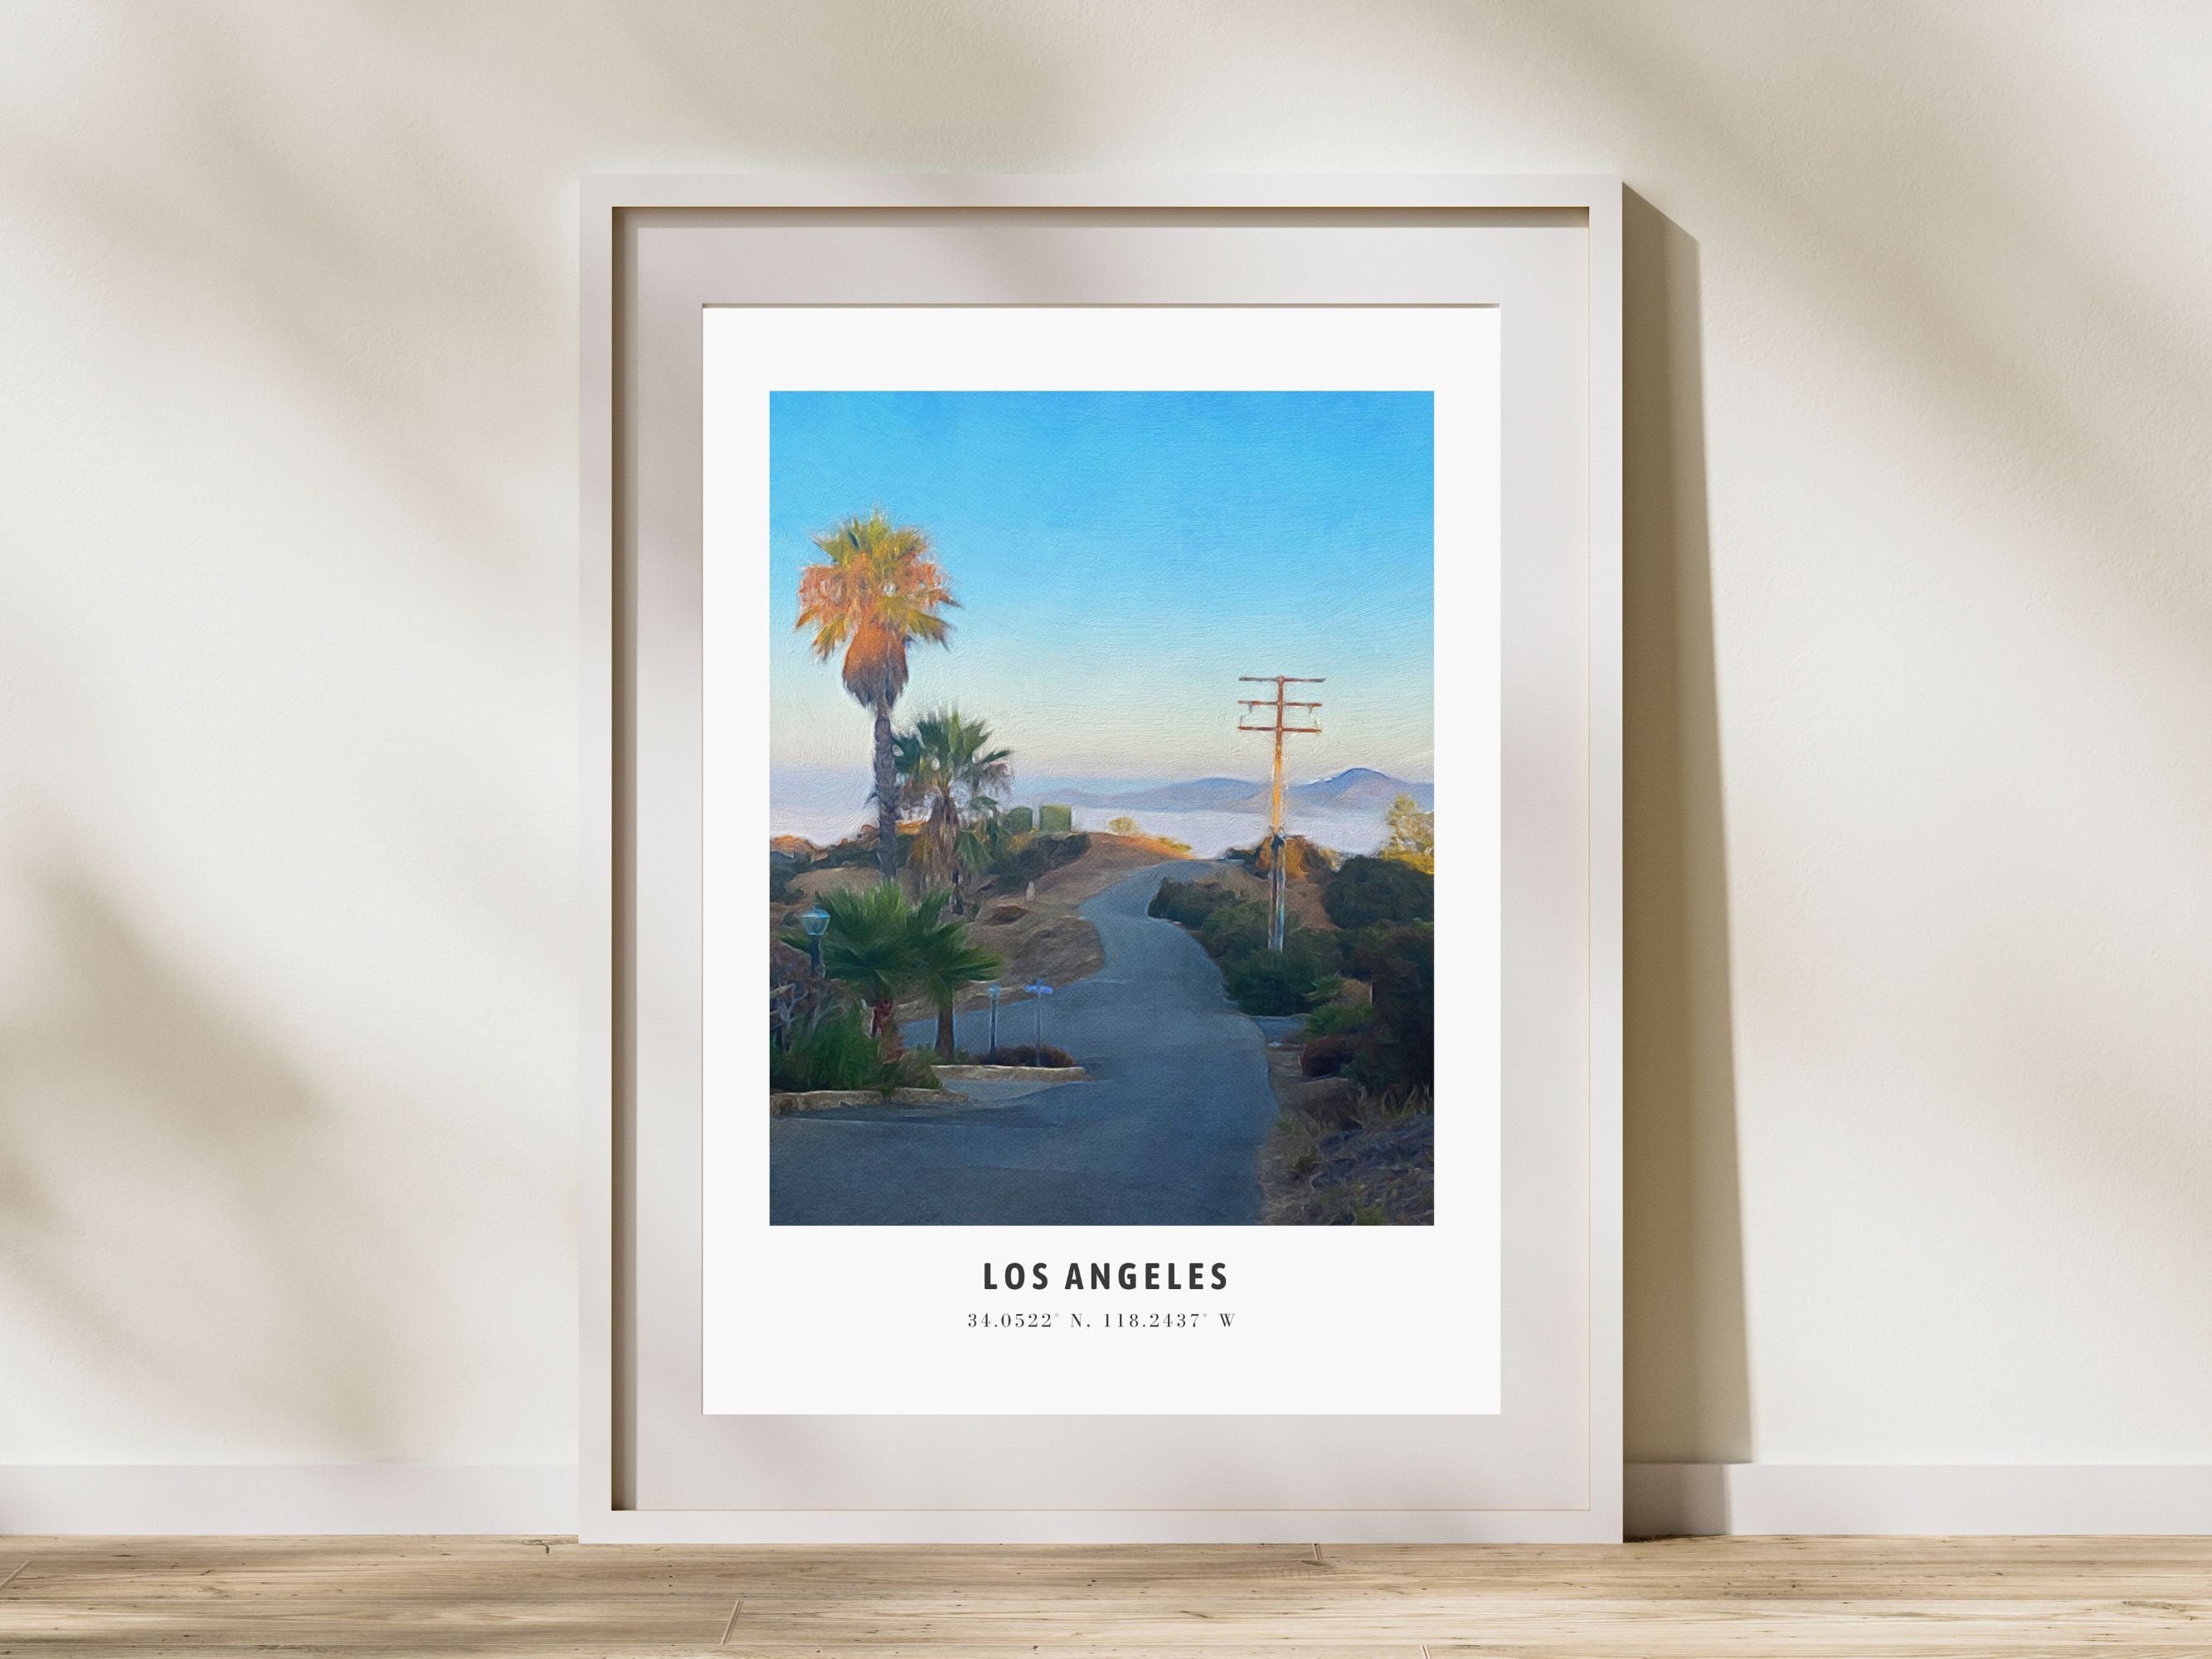 Los Angeles Poster / Los Angeles Wall Art / Printable Wall Art for  Aesthetic Room Decor / Gallery Wall Art for Travel / Digital Download - Etsy